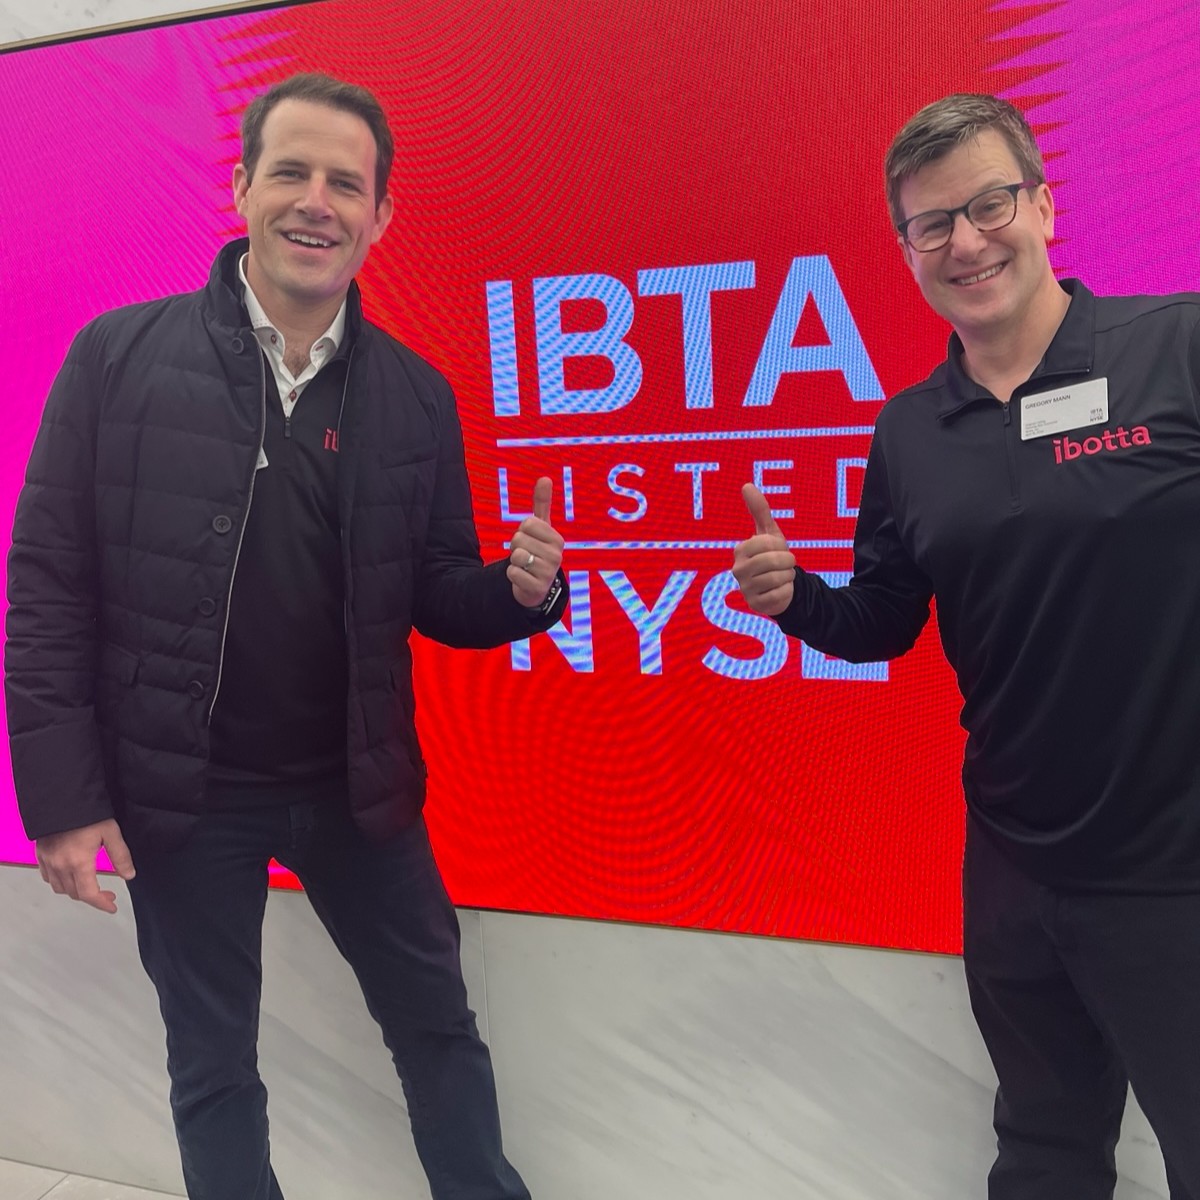 Congratulations to Business Administration alumnus Gregory Mann '94, who is a founding member of the mobile rewards company, Ibotta which recently went public on the NYSE with a $2+ billion valuation! #EtownExcellence #BlueJaysAlways Learn more: on.wsj.com/4aYad8t.